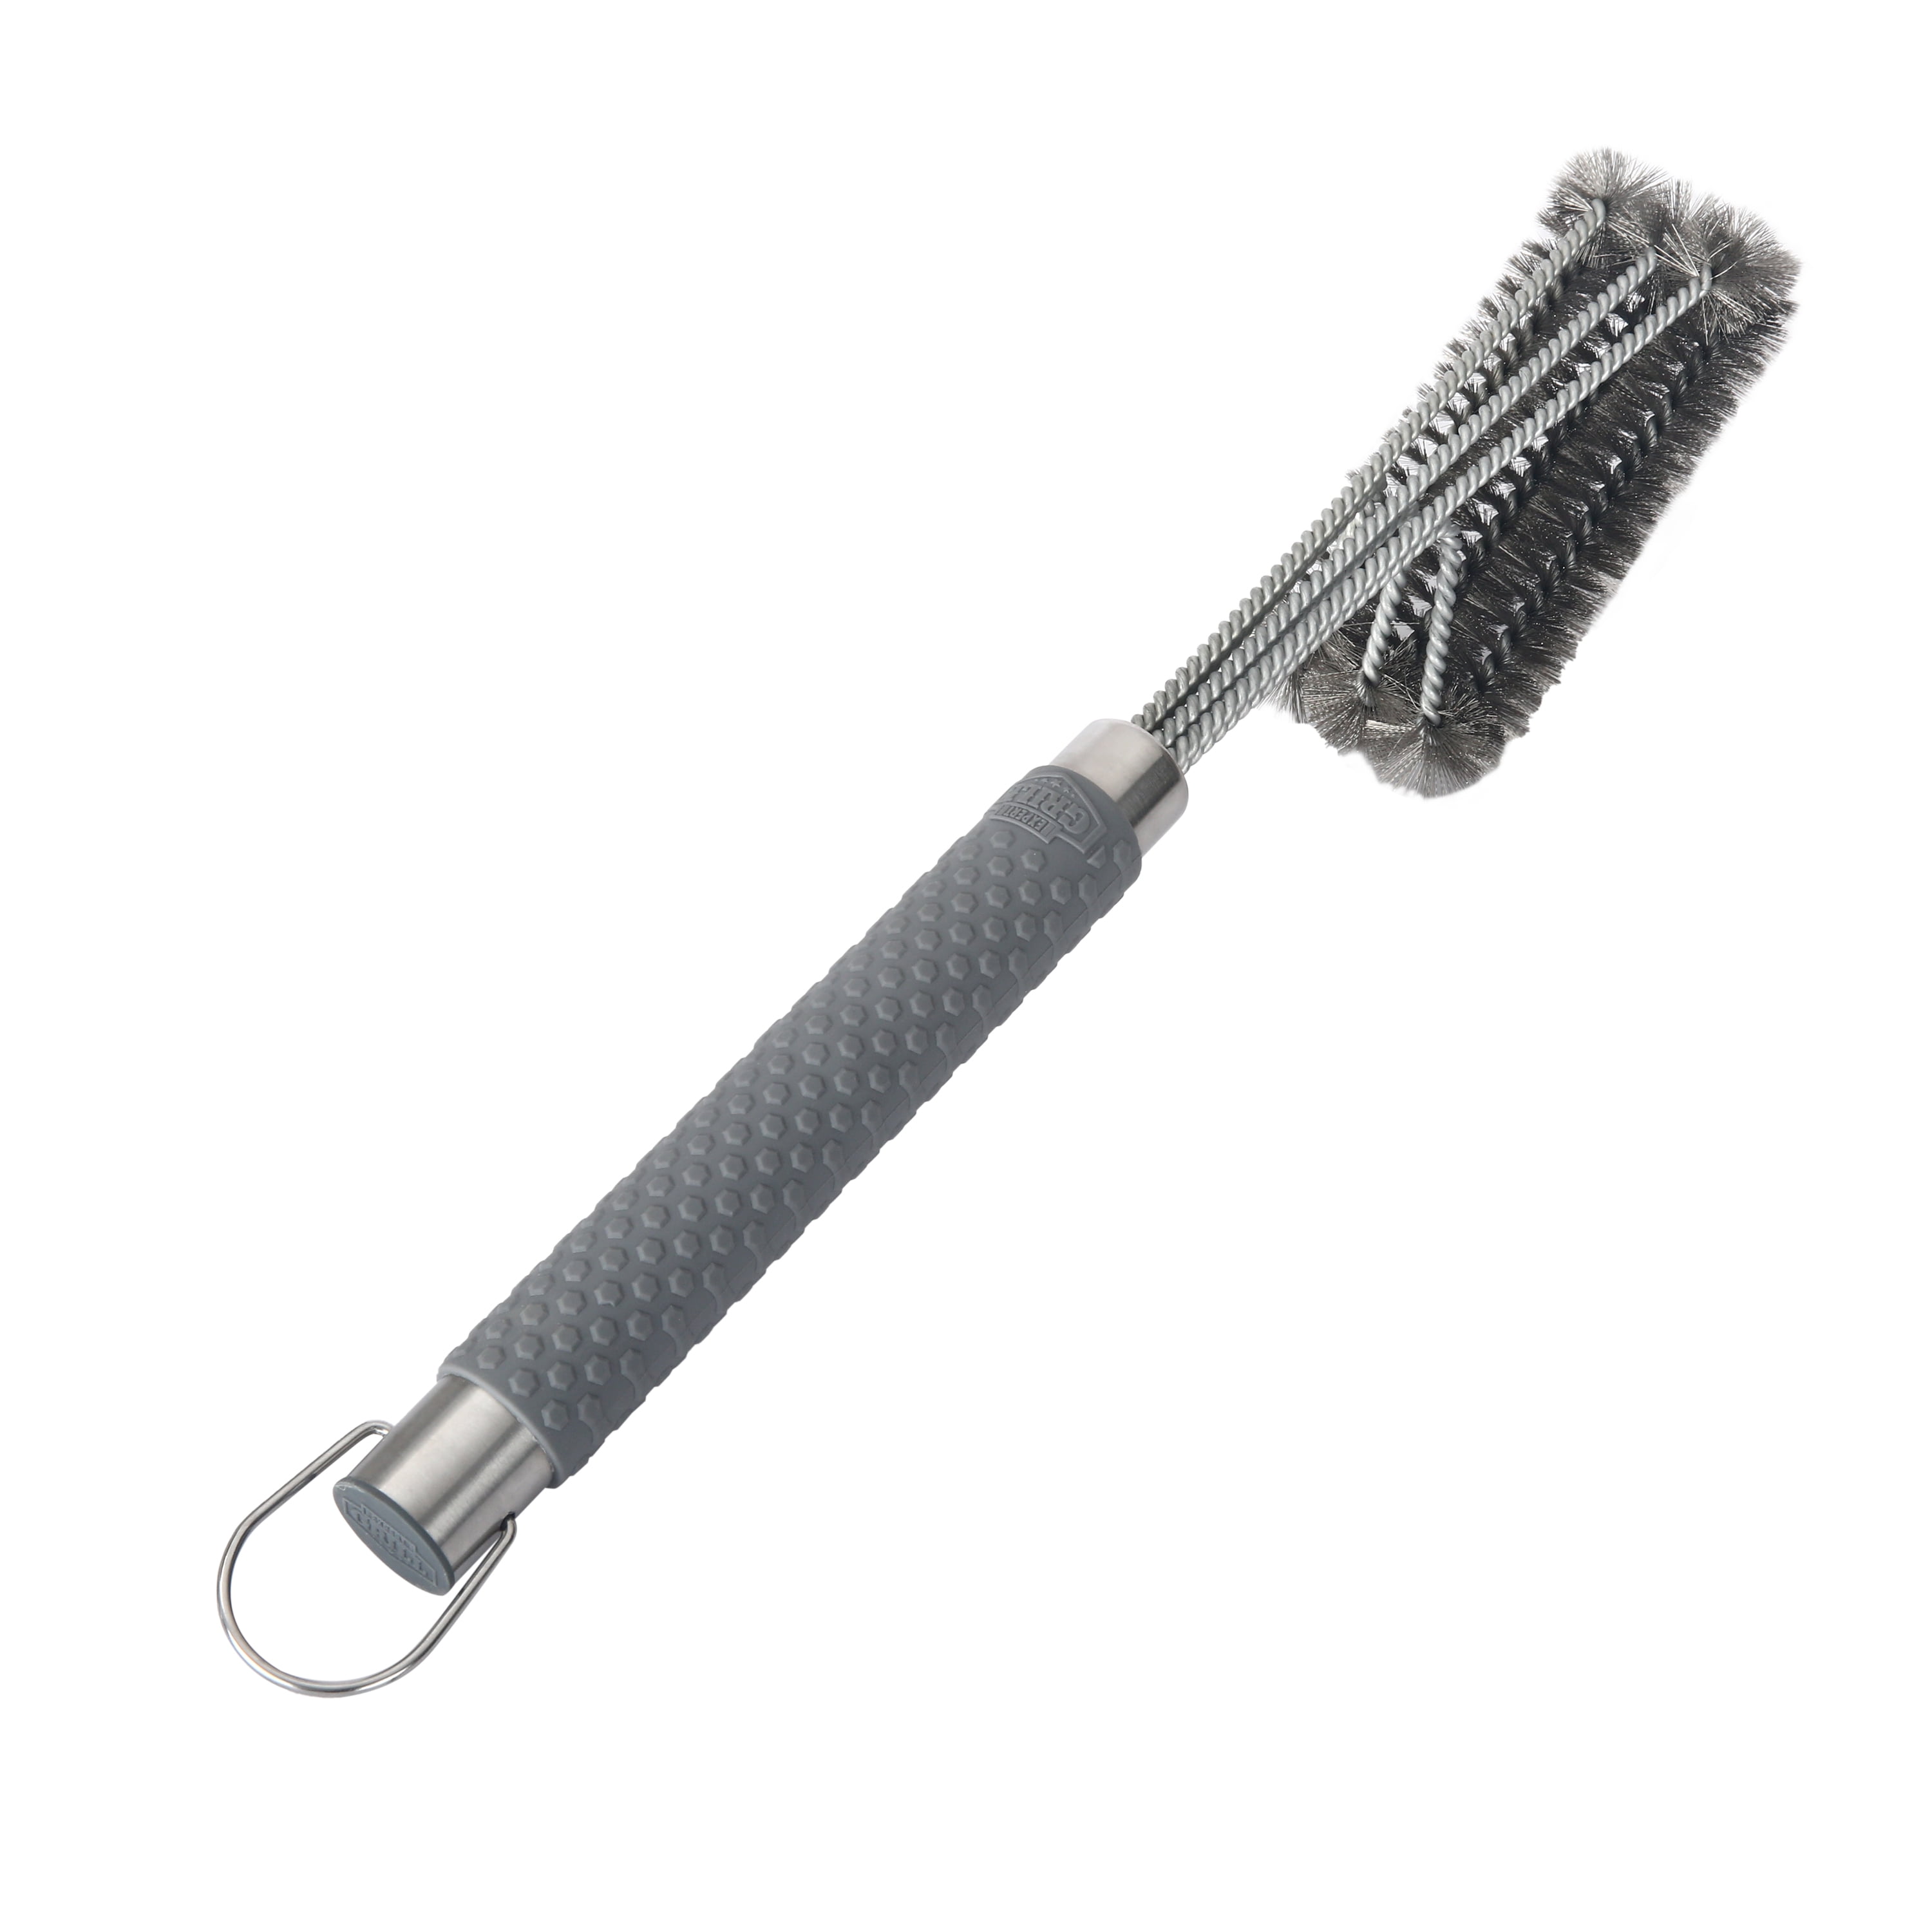 GrillPro 18.3 In. Steel Coil Spring Grill Cleaning Brush with